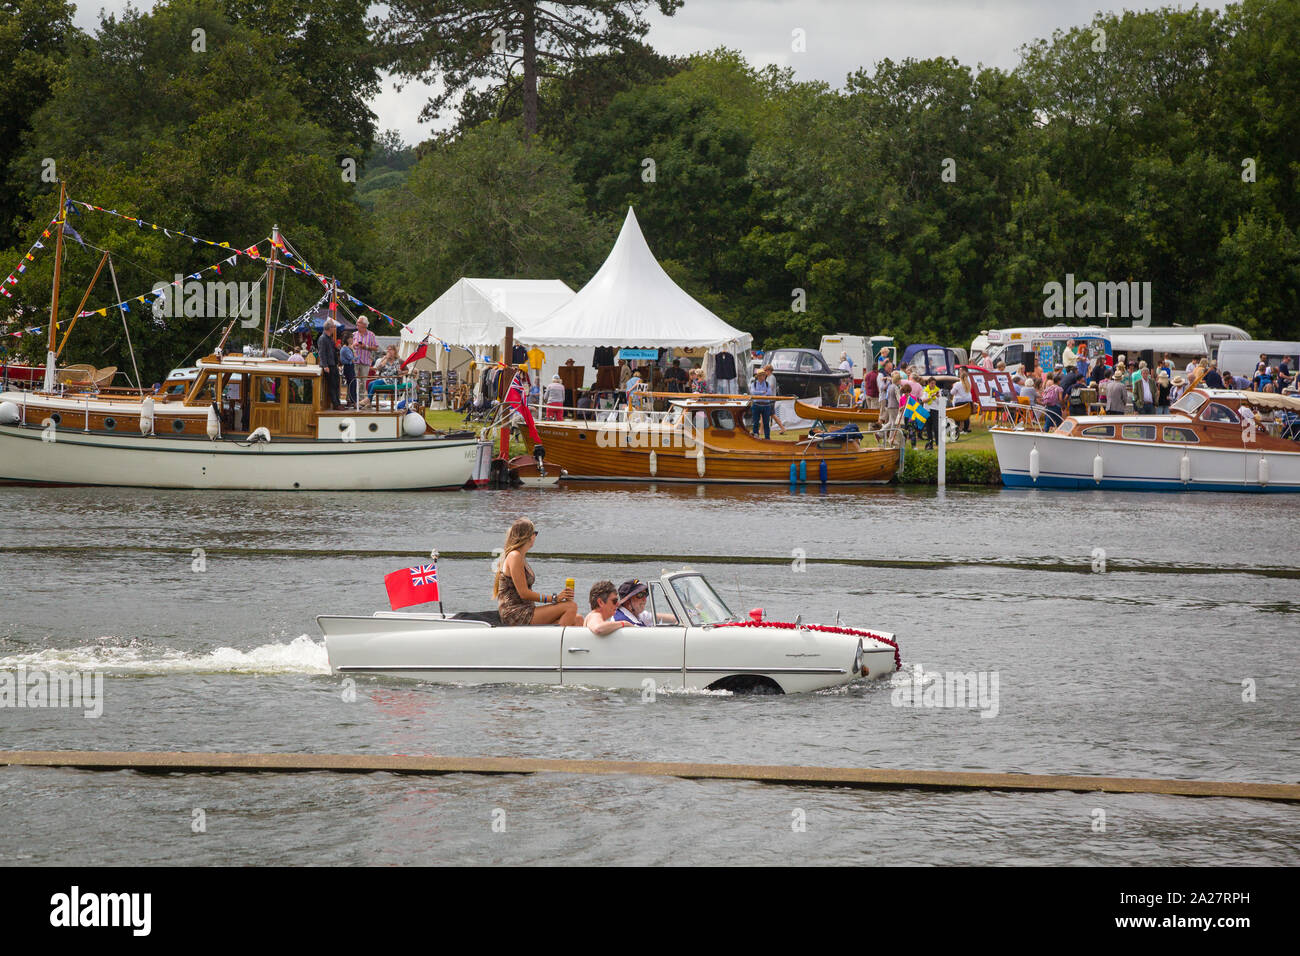 An American Amphicar 770 amphibious car passes the Traditional Thames Boat Rally 2019 at Henley-on-Thames Stock Photo